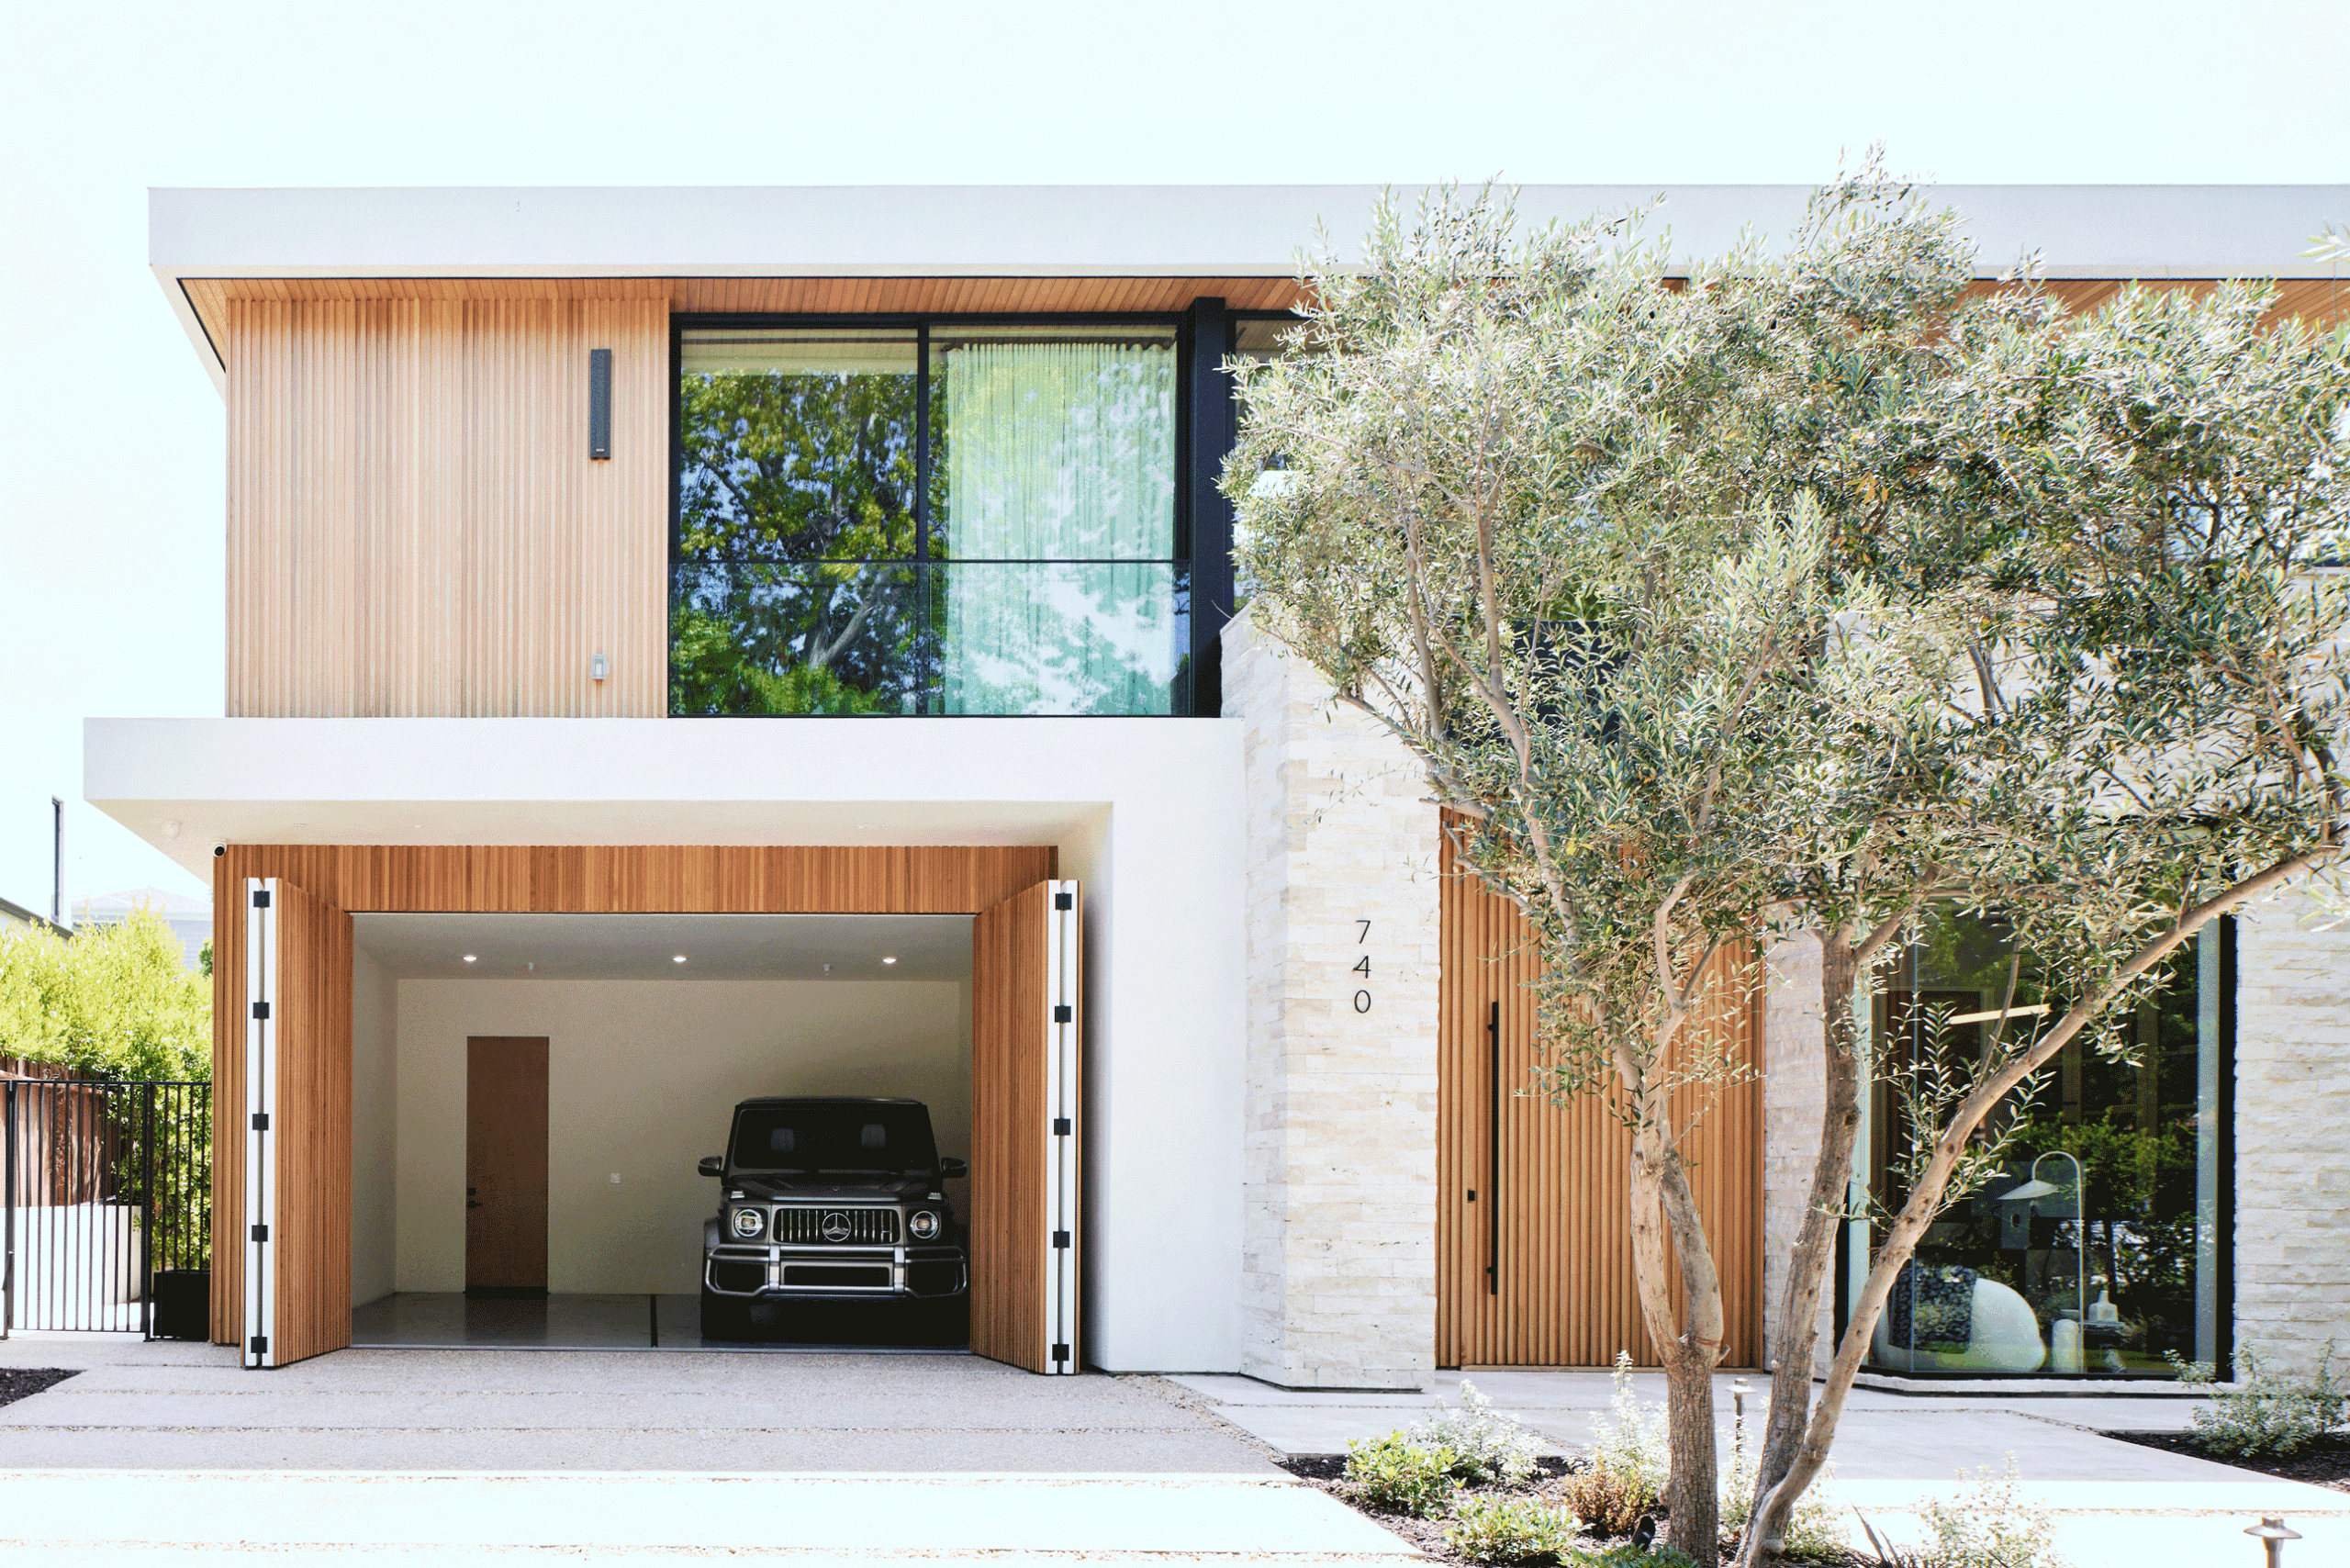 A car is parked in the garage of this modern house.